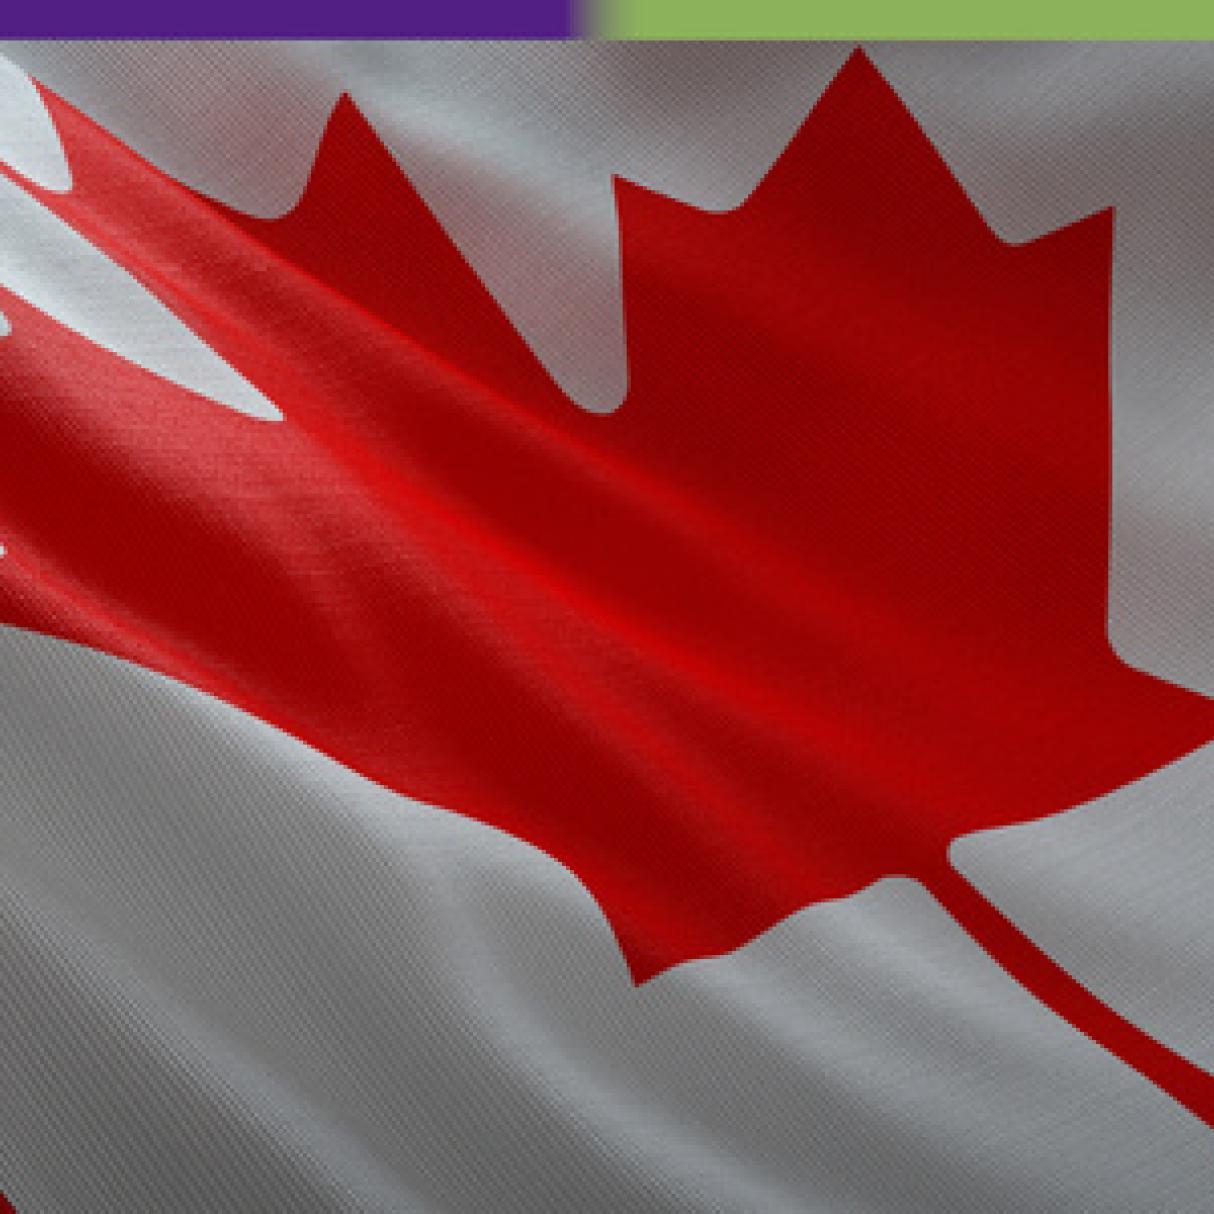 A canadian flag stretches across the screen. It has a red leaf surrounded by a red and white stripe.